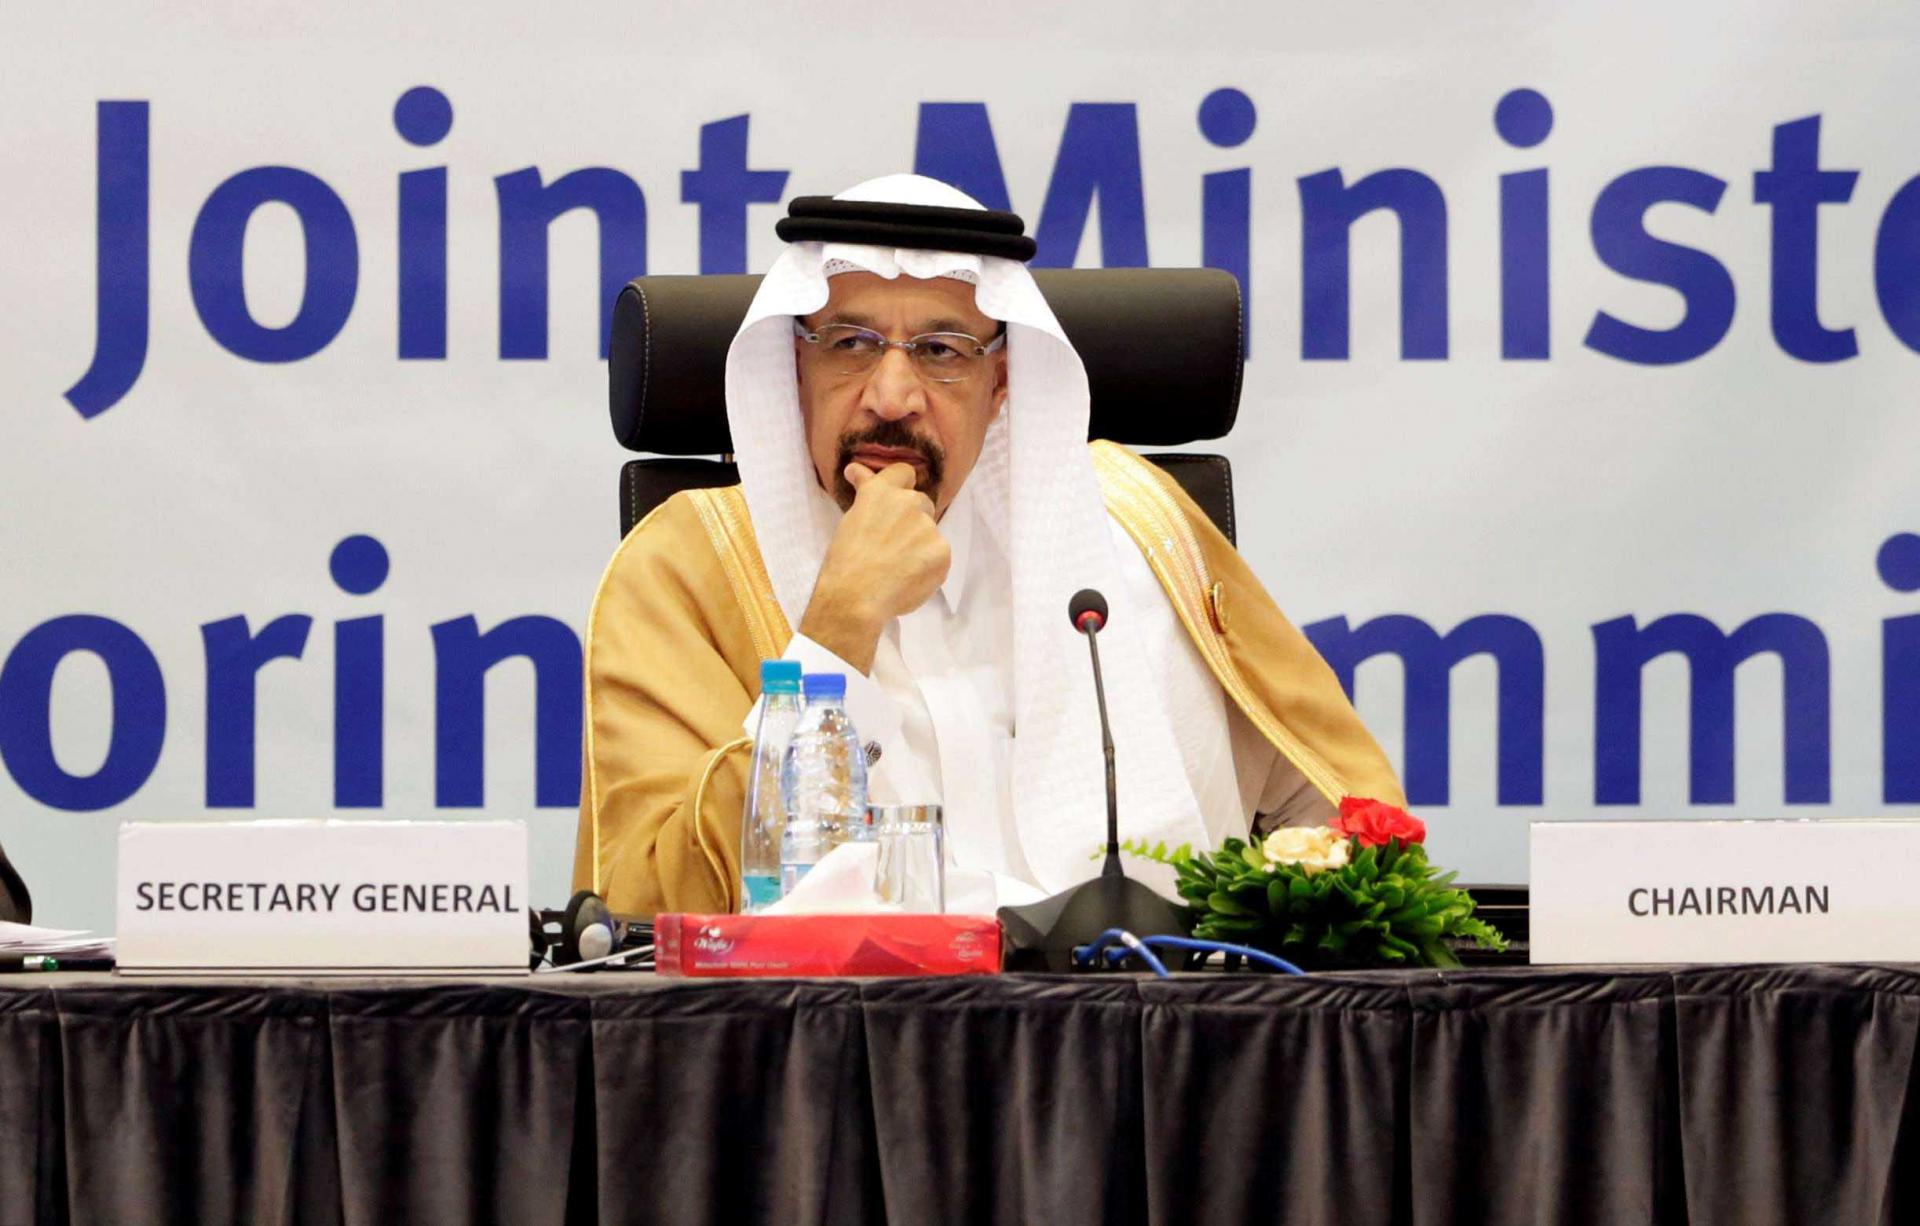 Saudi Arabian Energy Minister Khalid al-Falih during the inaugural session ceremony of the OPEC Ministerial Monitoring Committee in Algiers, Algeria September 23, 2018